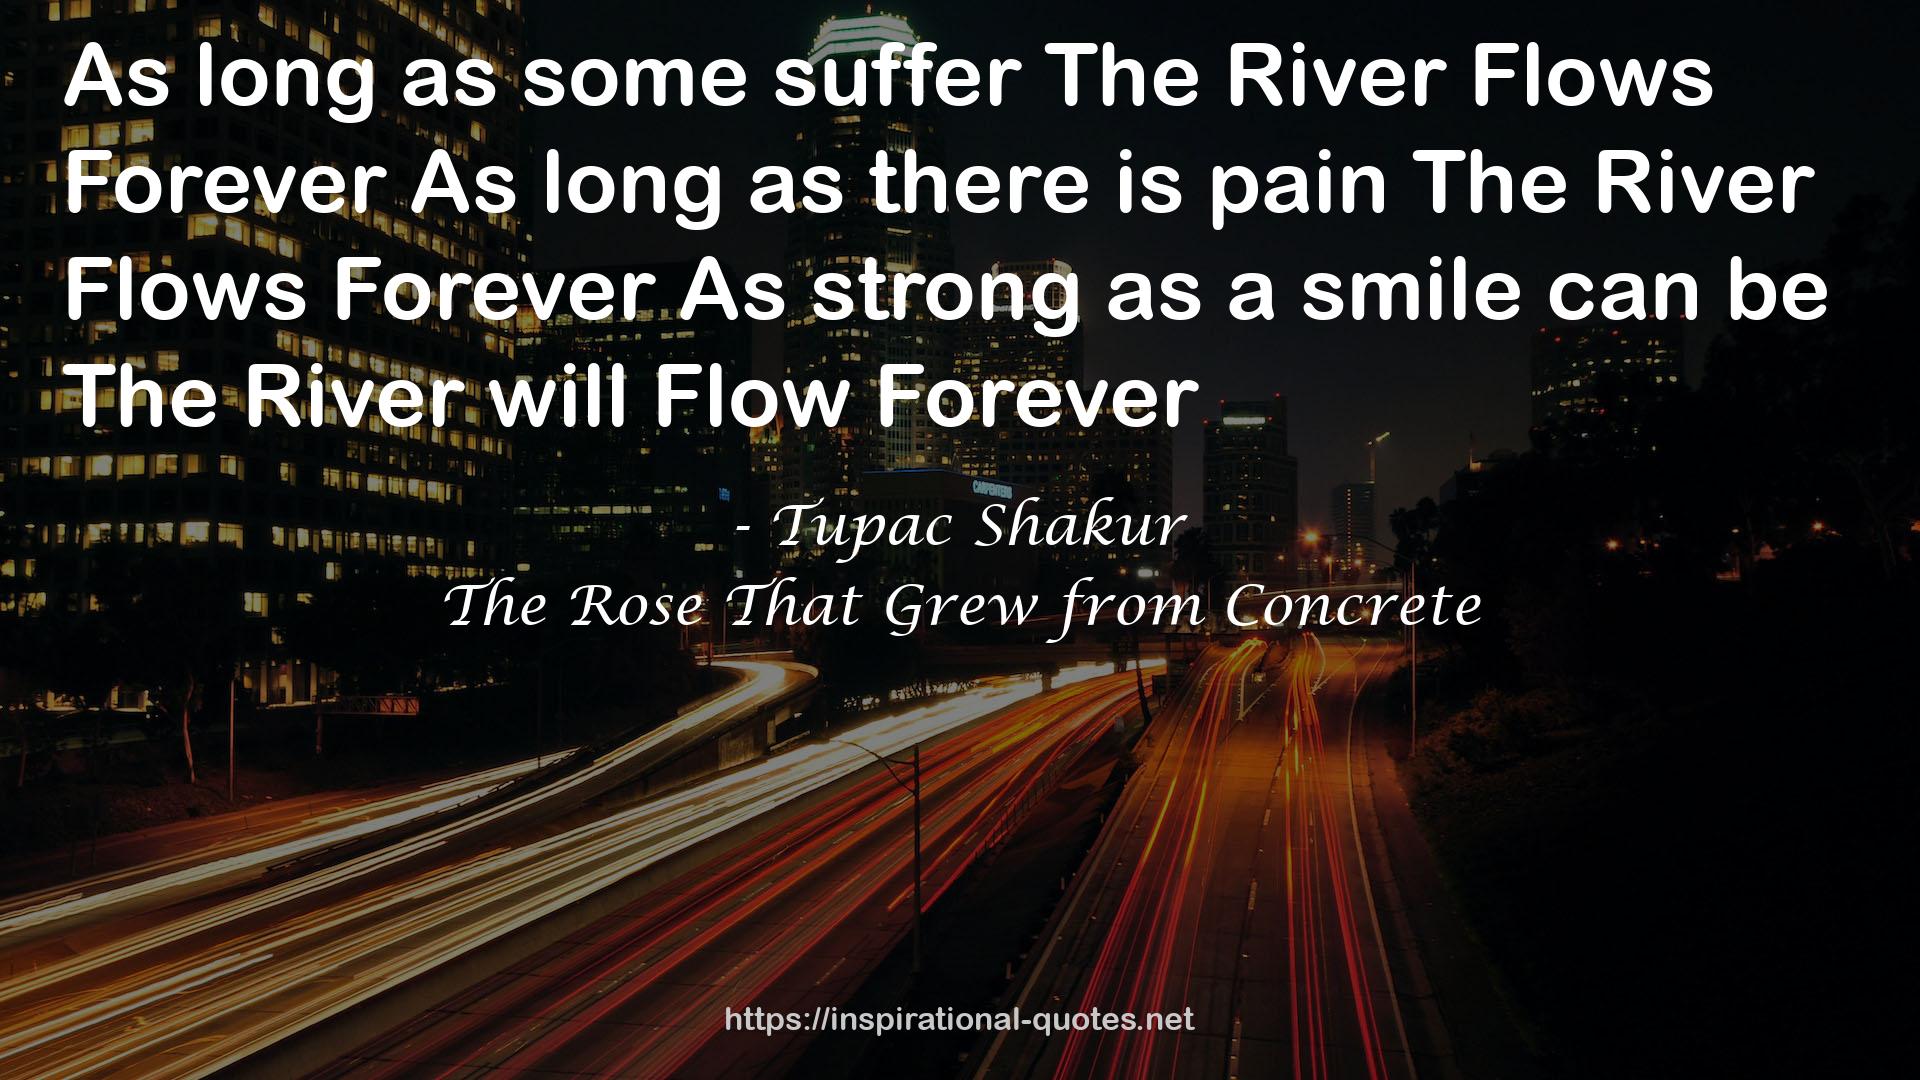 some sufferThe River Flows ForeverAs  QUOTES